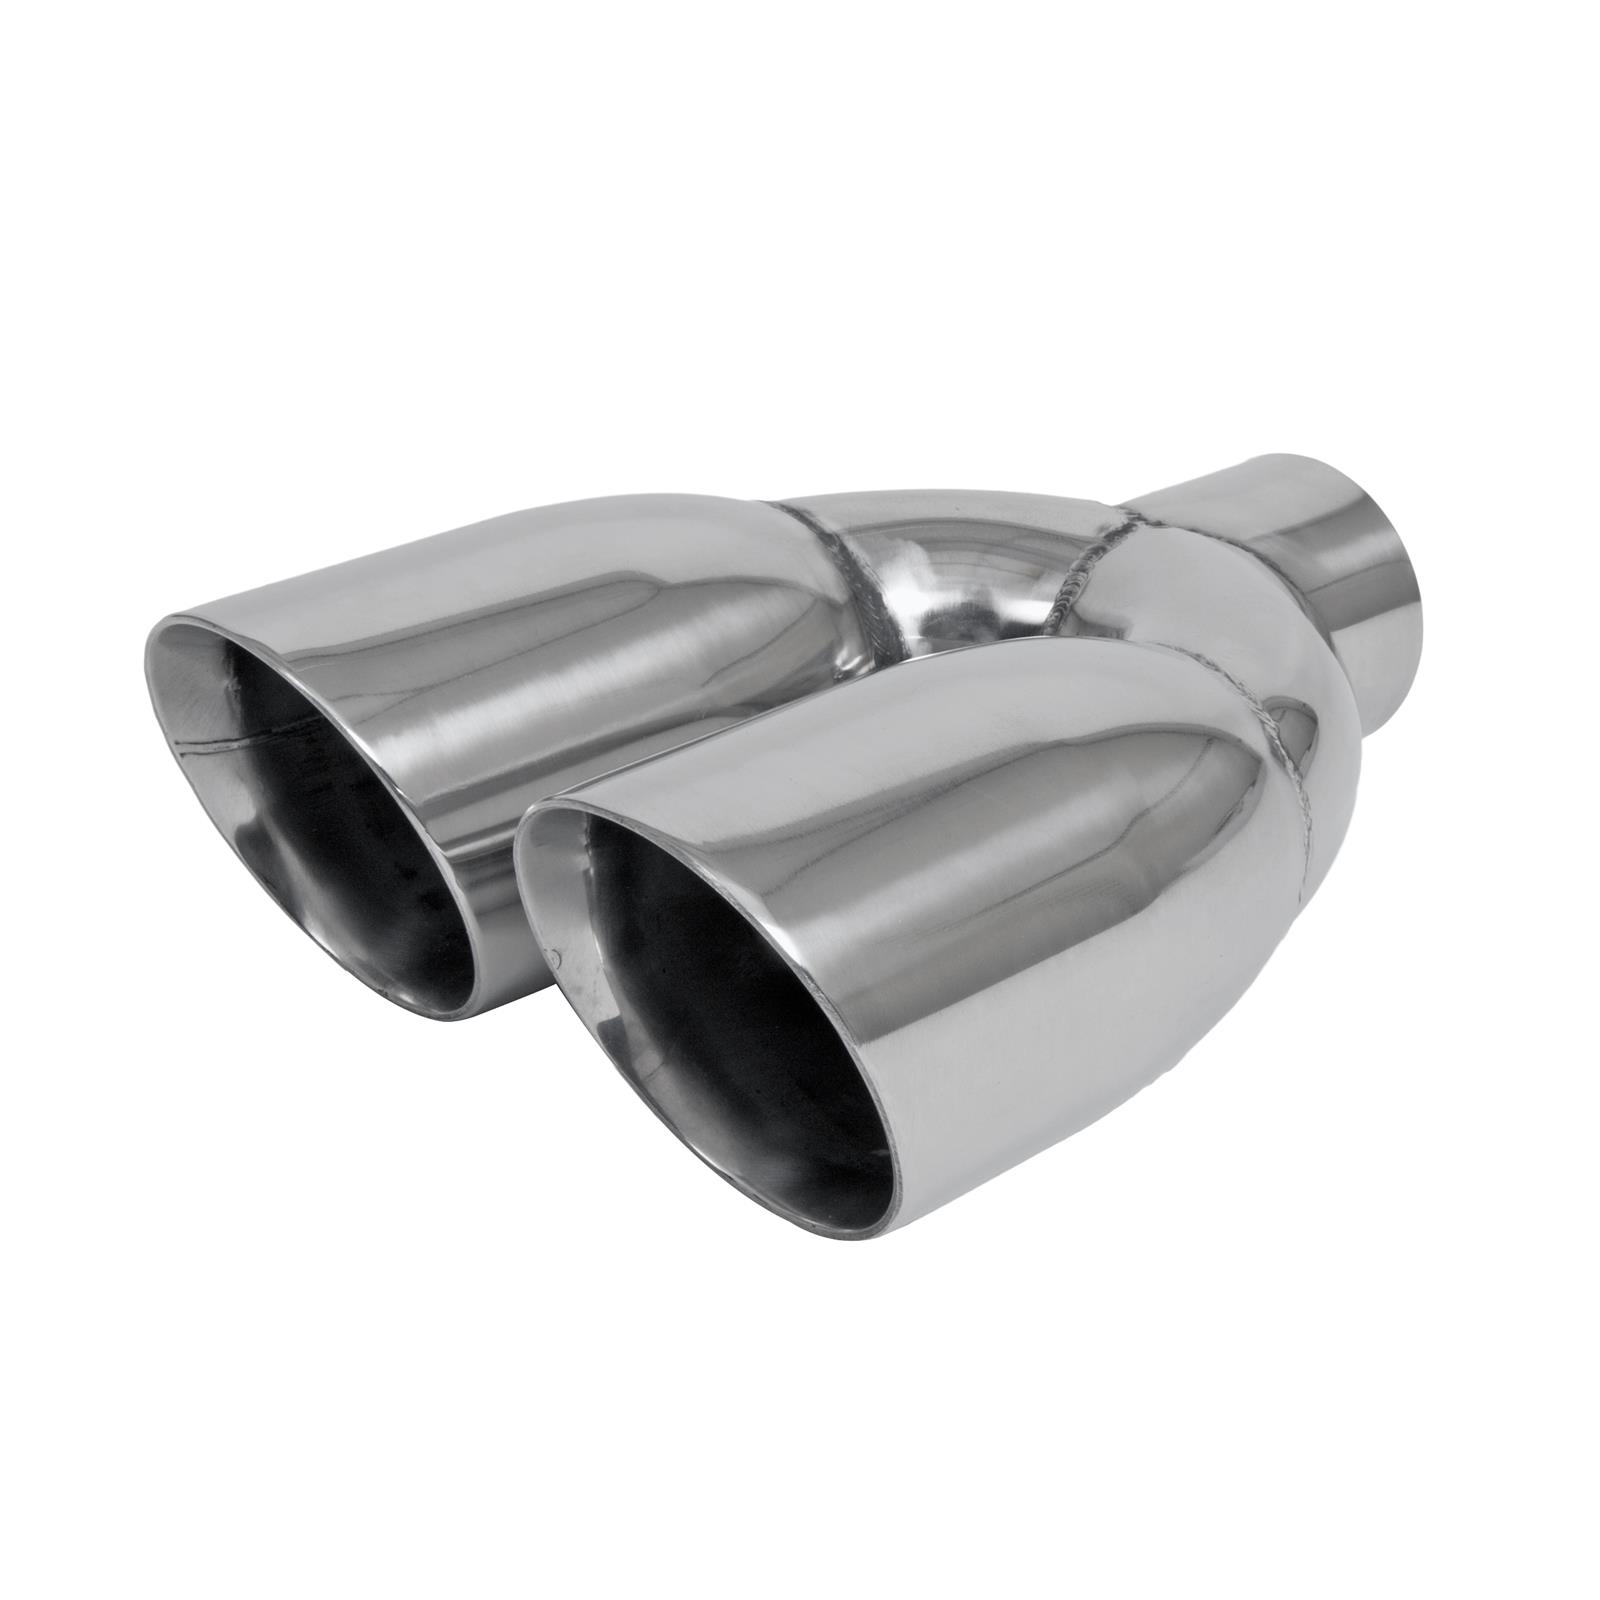 2019 Dodge Charger Rt Exhaust Tips - How Much?